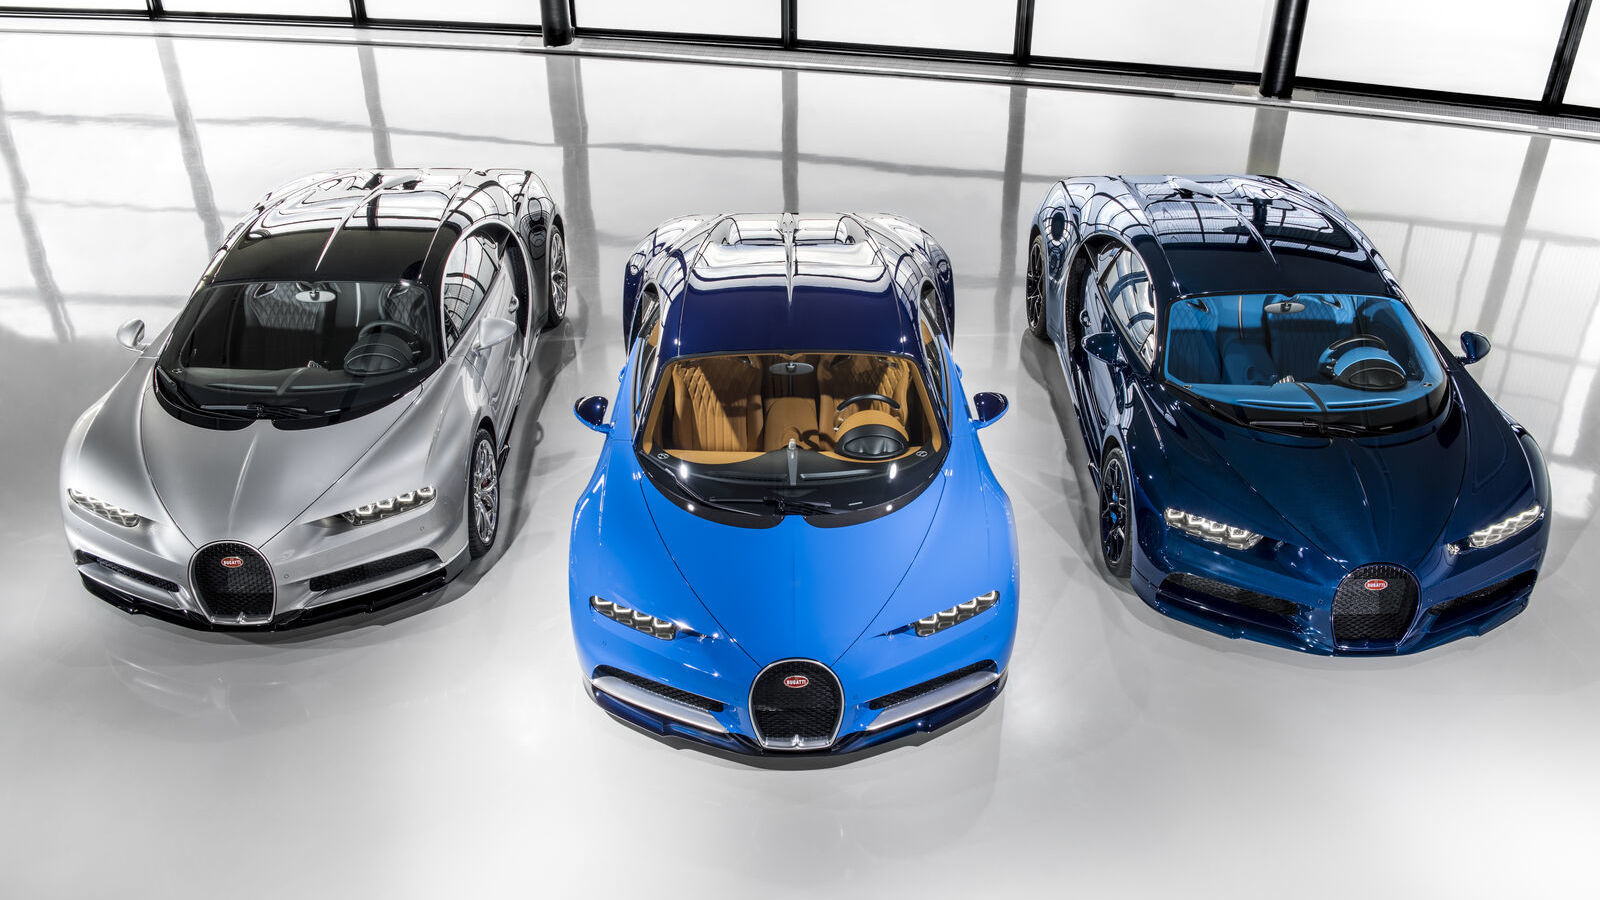 Bugatti is going to make only 40 more units of its Chiron lineup